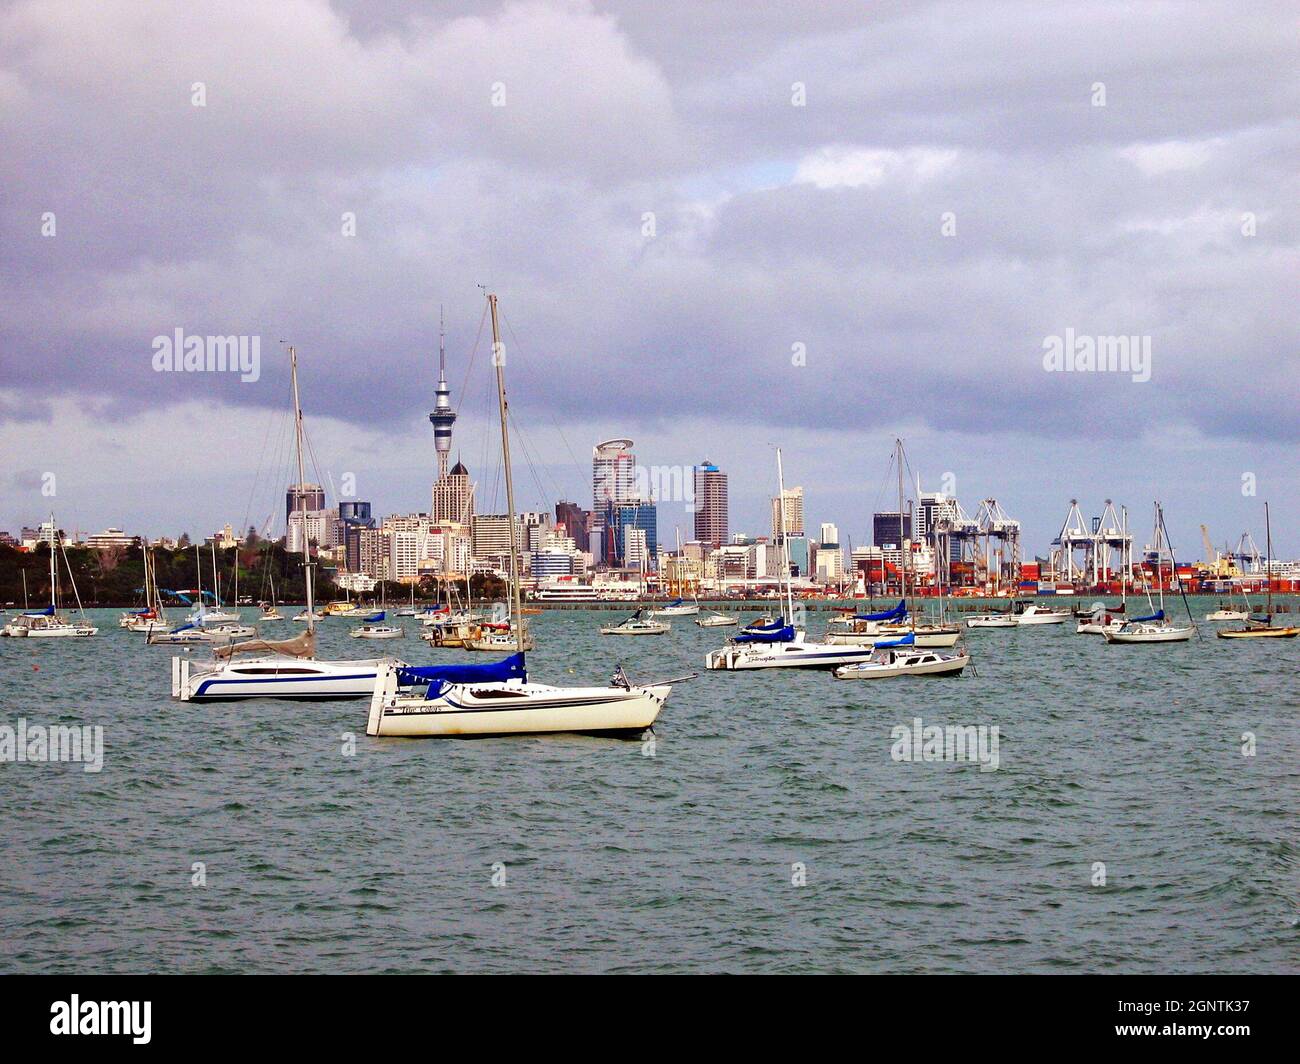 An overcast October day in Auckland, New Zealand with the skyline in the background and sailboats on the water in the foreground. The nickname for the city is the City of Sails. Stock Photo